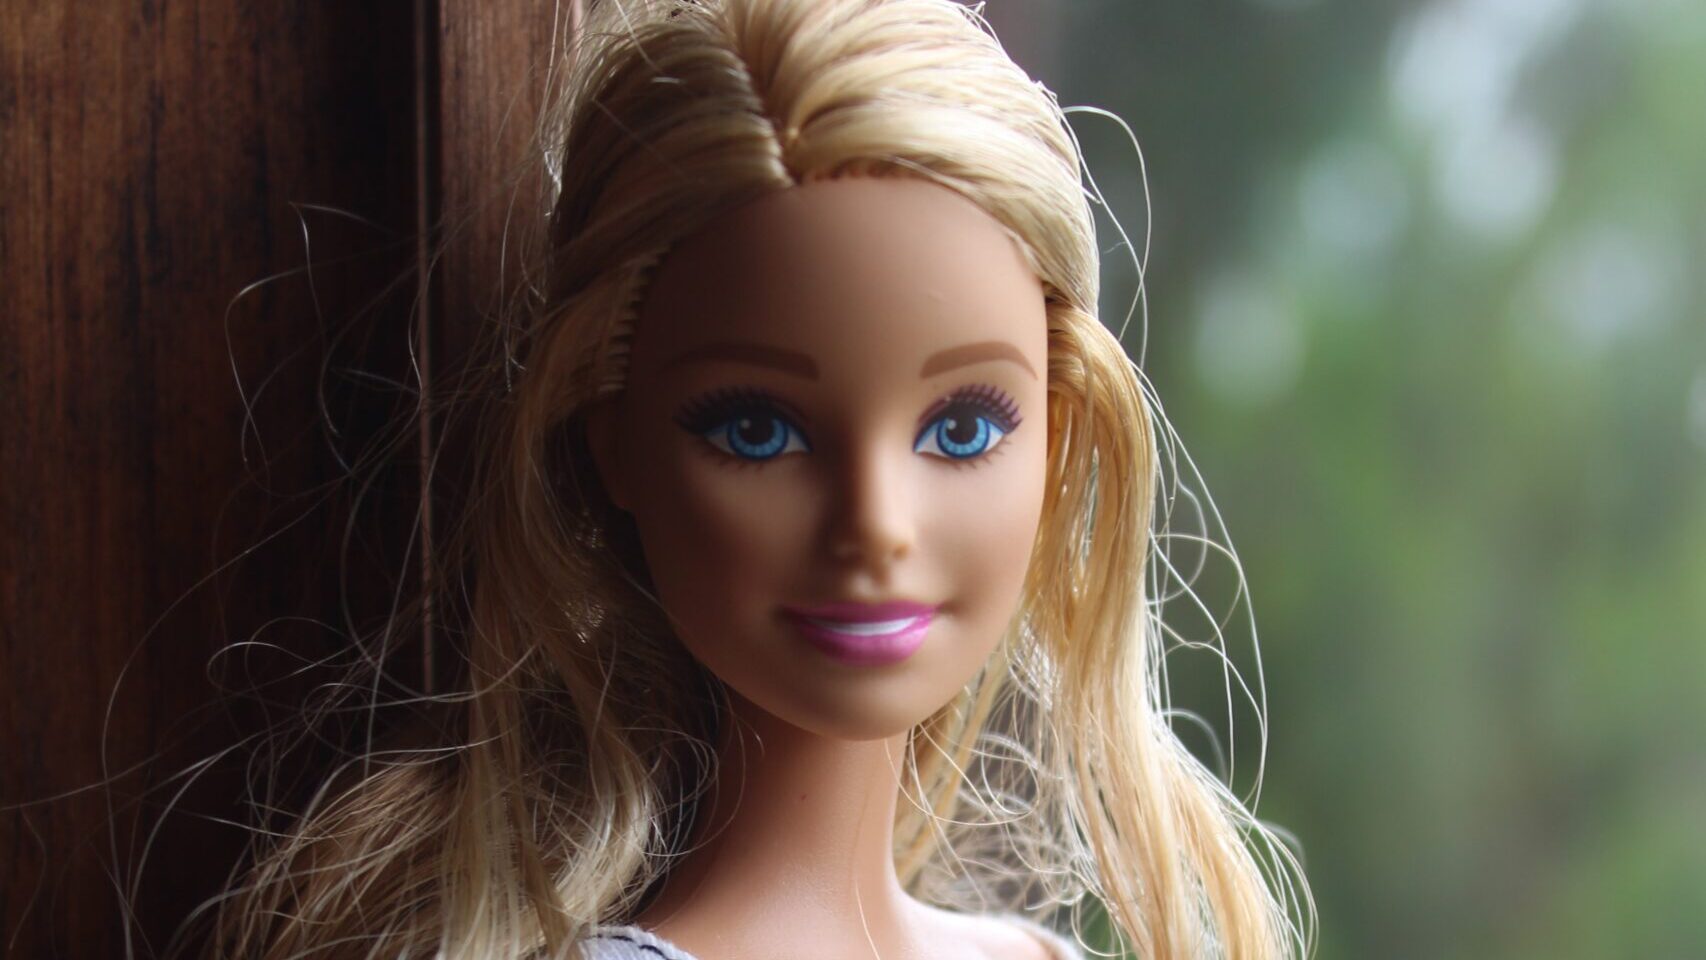 Allan Doll Prices Surge After Release Of 'Barbie' Movie